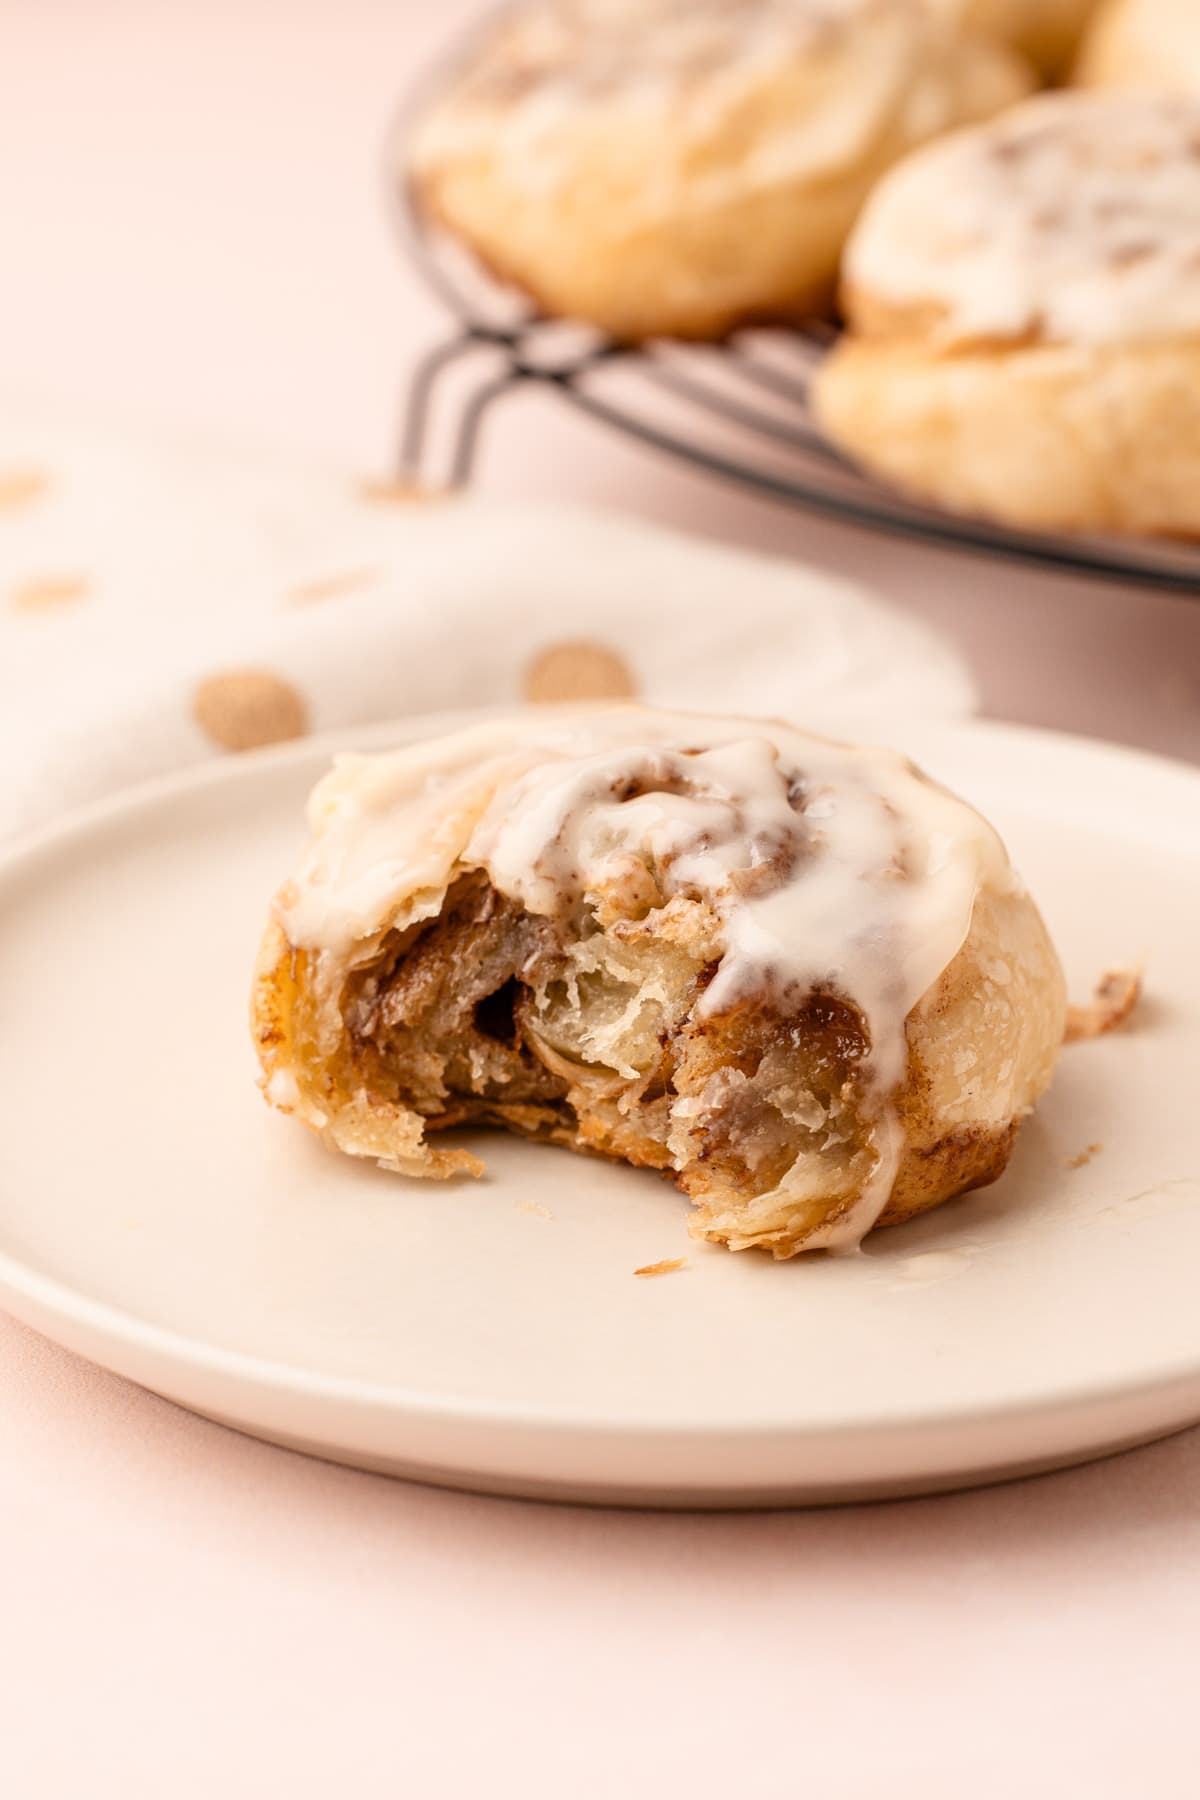 A baked and glazed puff pastry cinnamon roll on a plate, with a bite taken out of it.